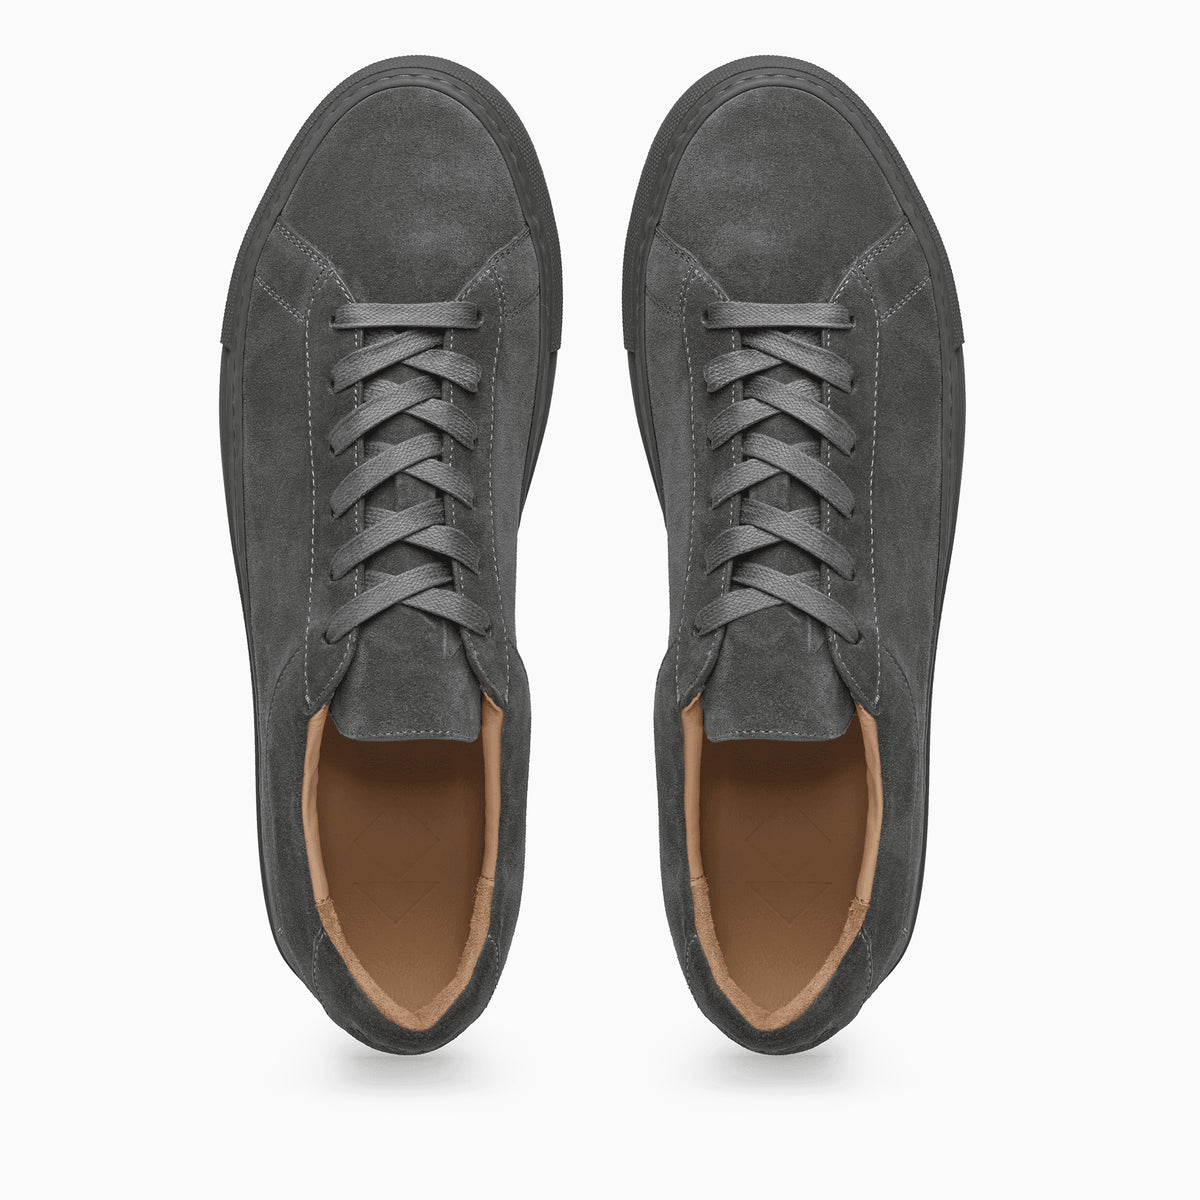 grey low top shoes